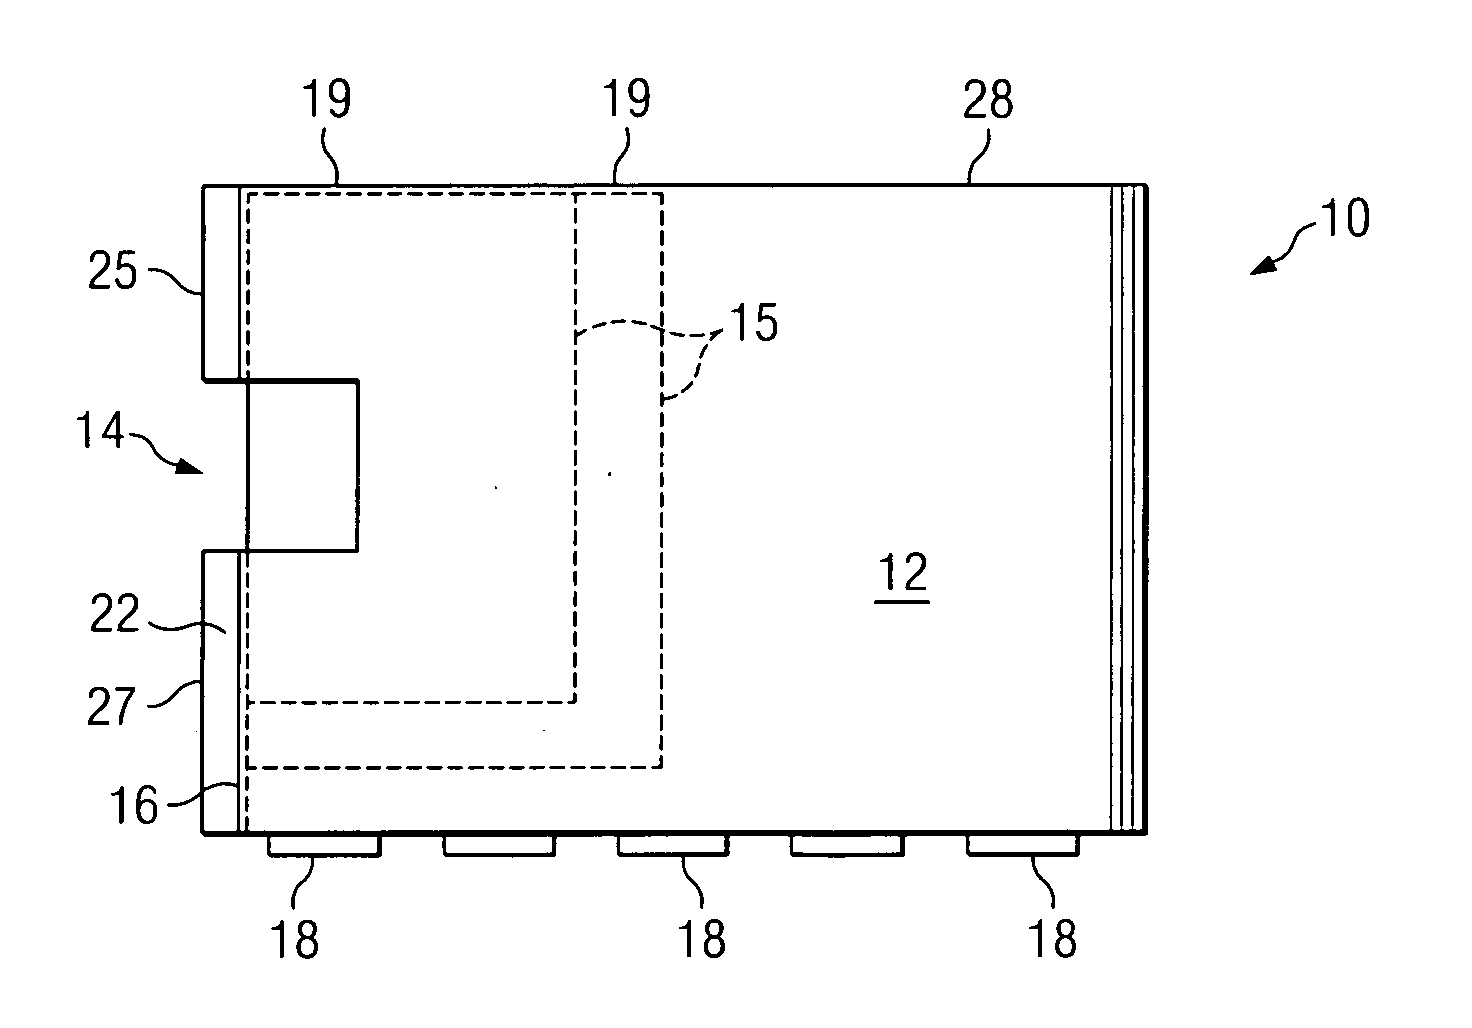 Mail distribution apparatus and method